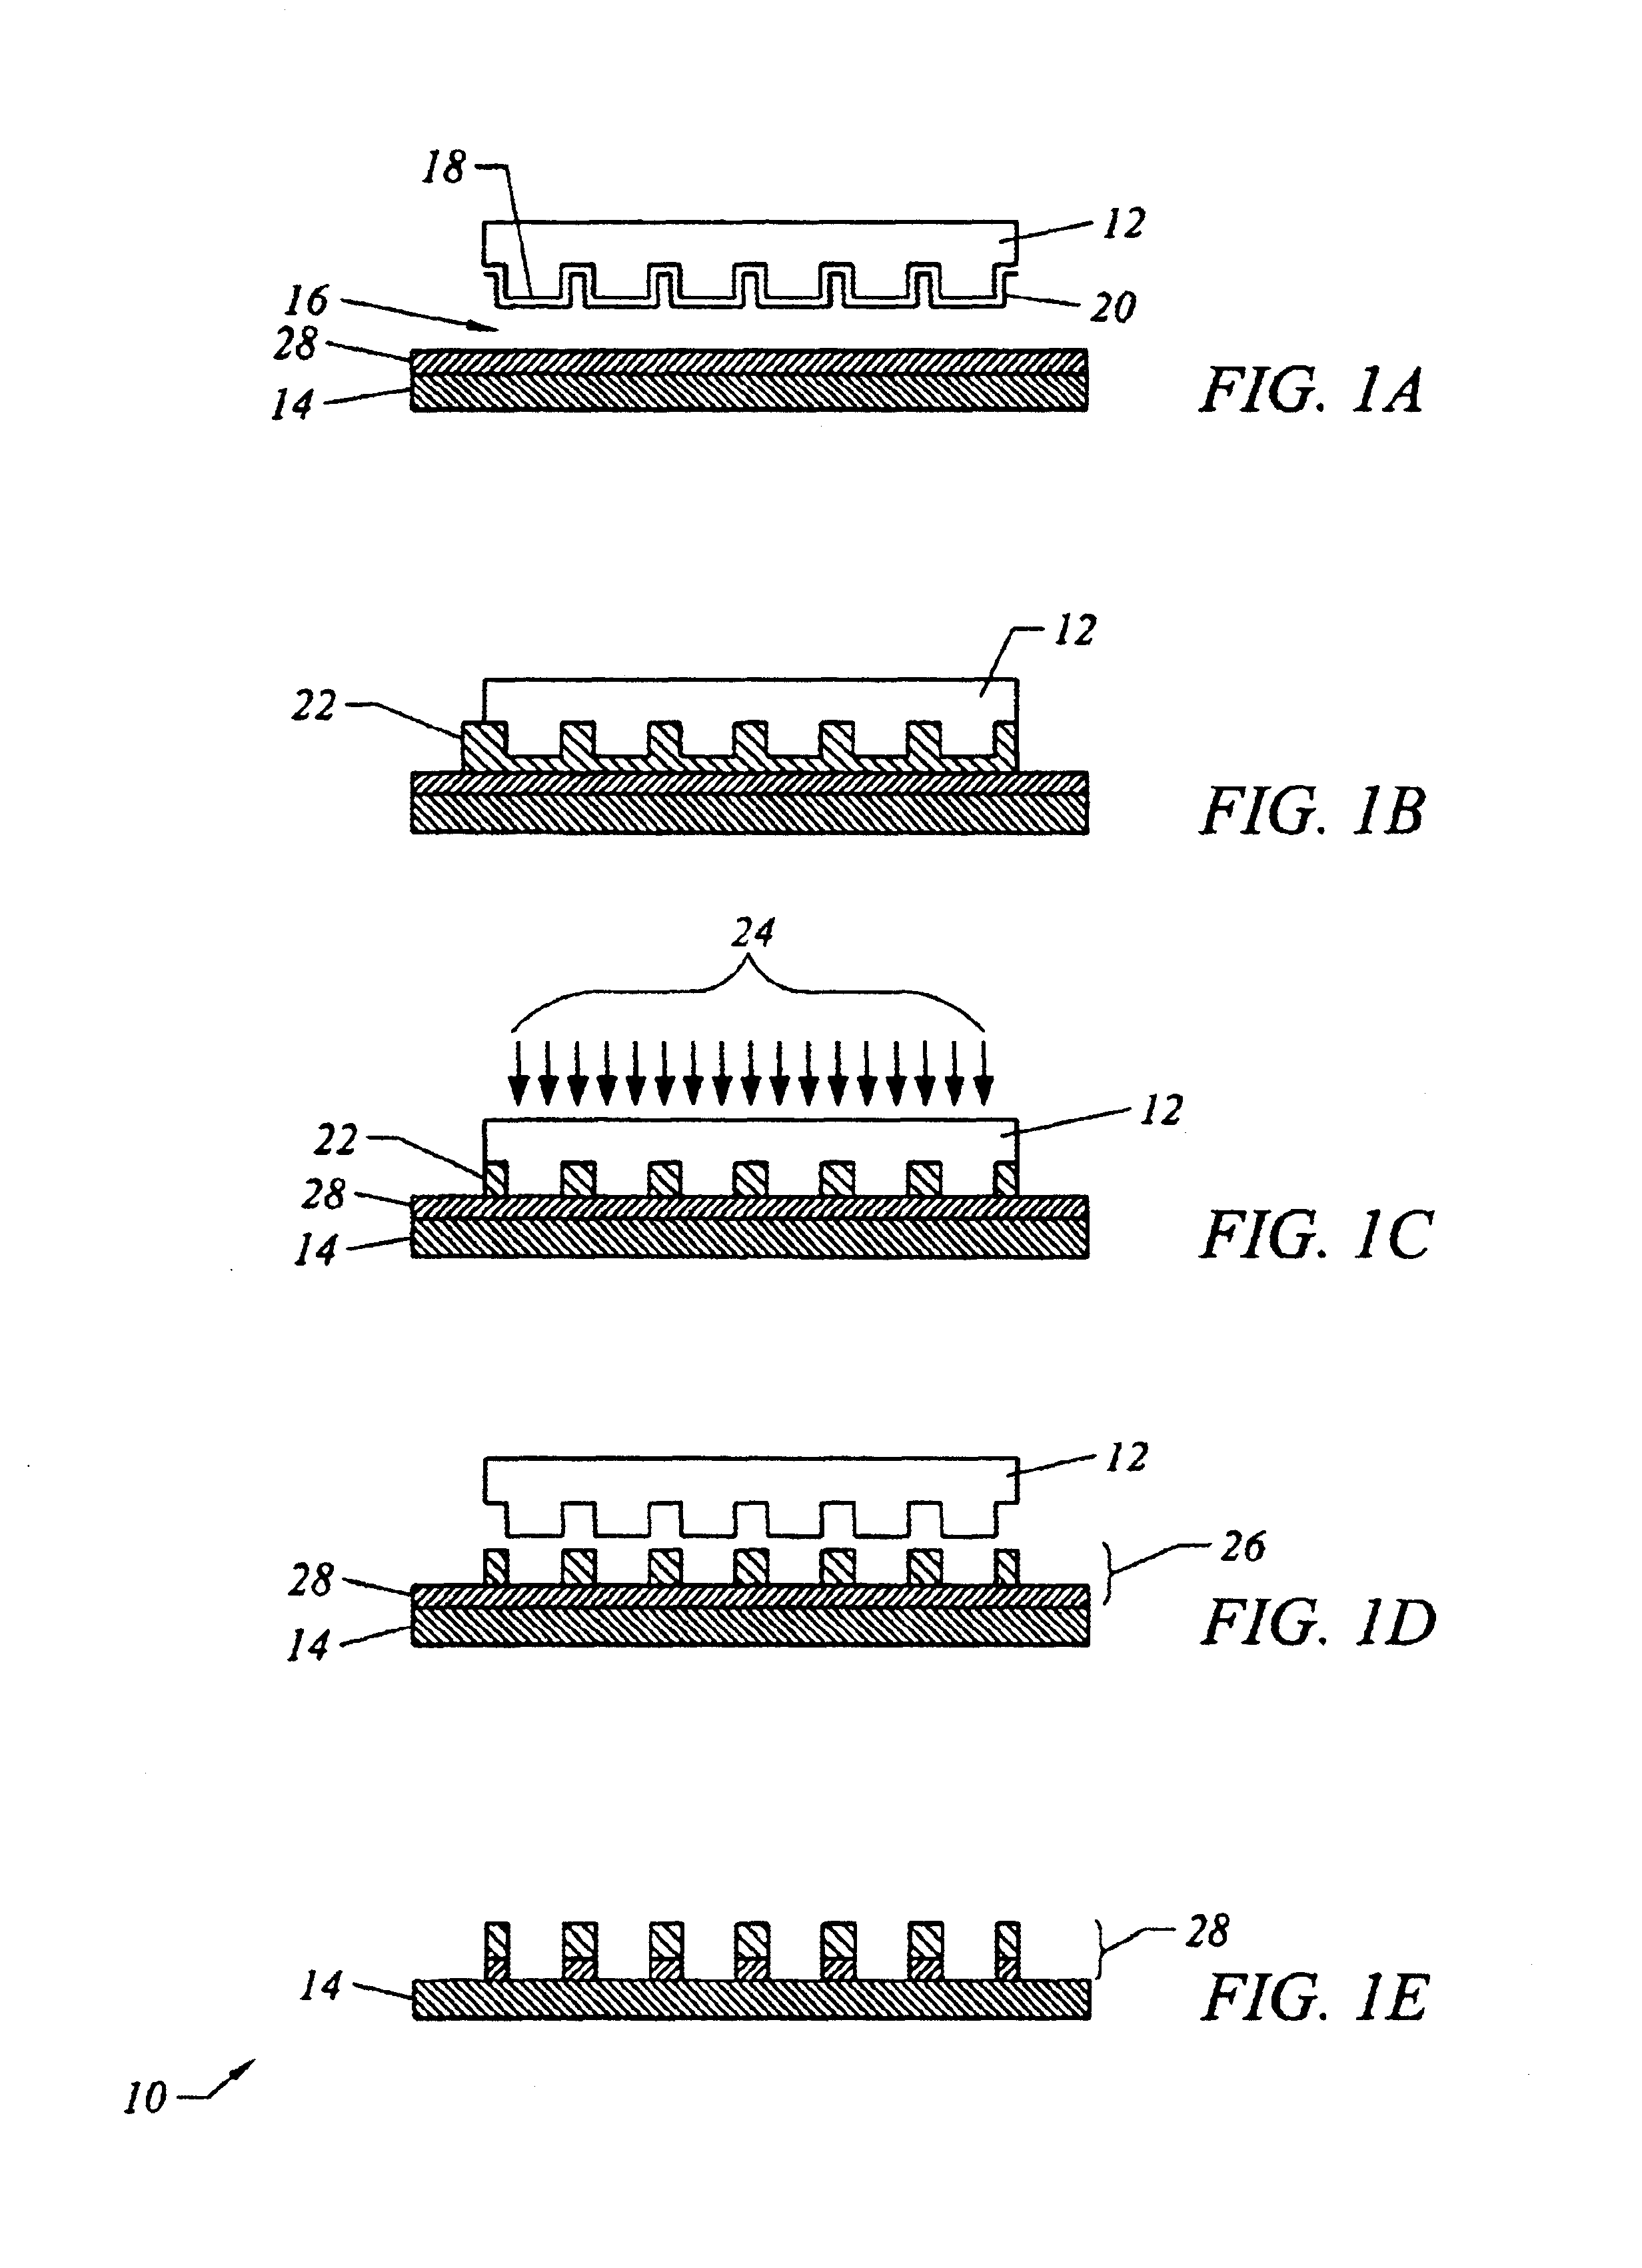 Method for fabricating nanoscale patterns in light curable compositions using an electric field